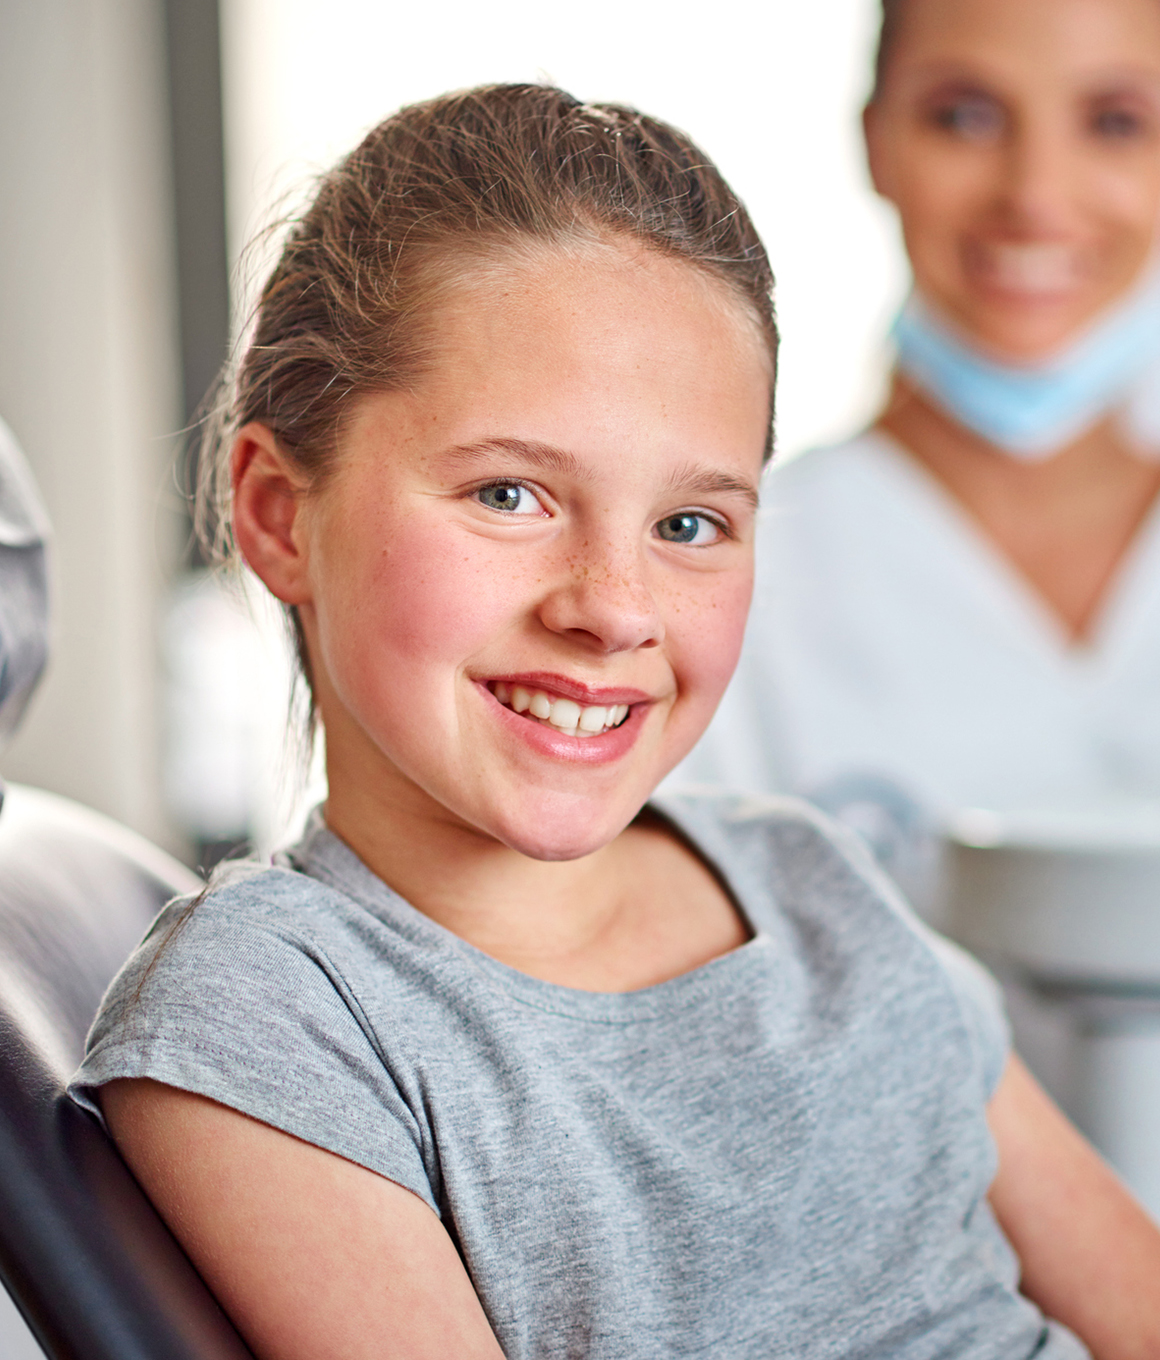 Child in gray tee shirt smiling in dental chair